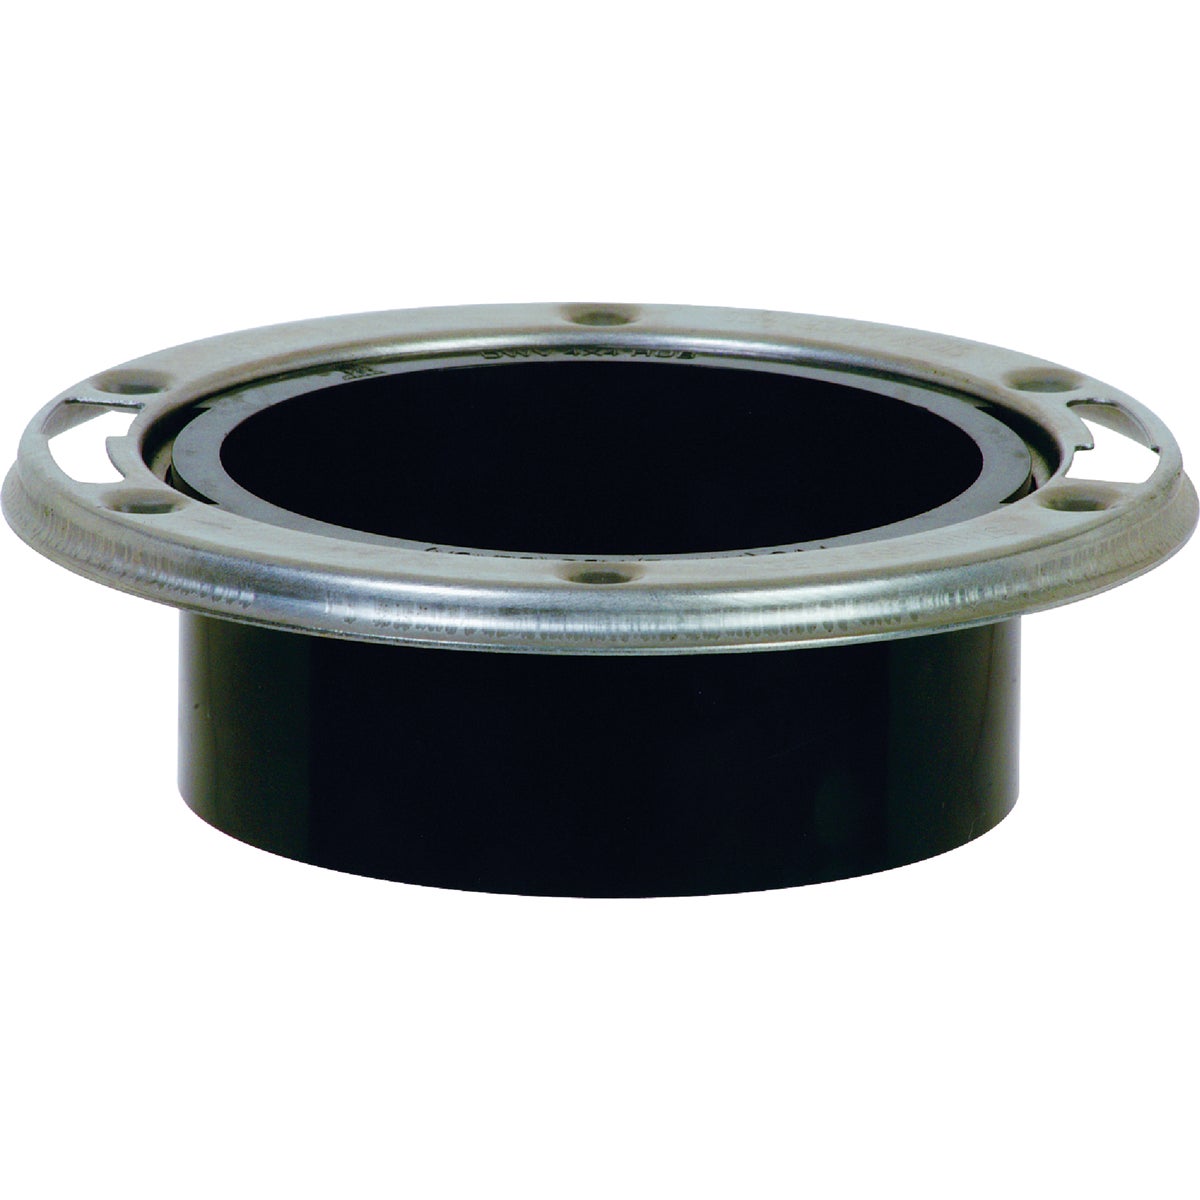 Item 446958, 4" hub ABS flush to floor with stainless steel swivel ring.